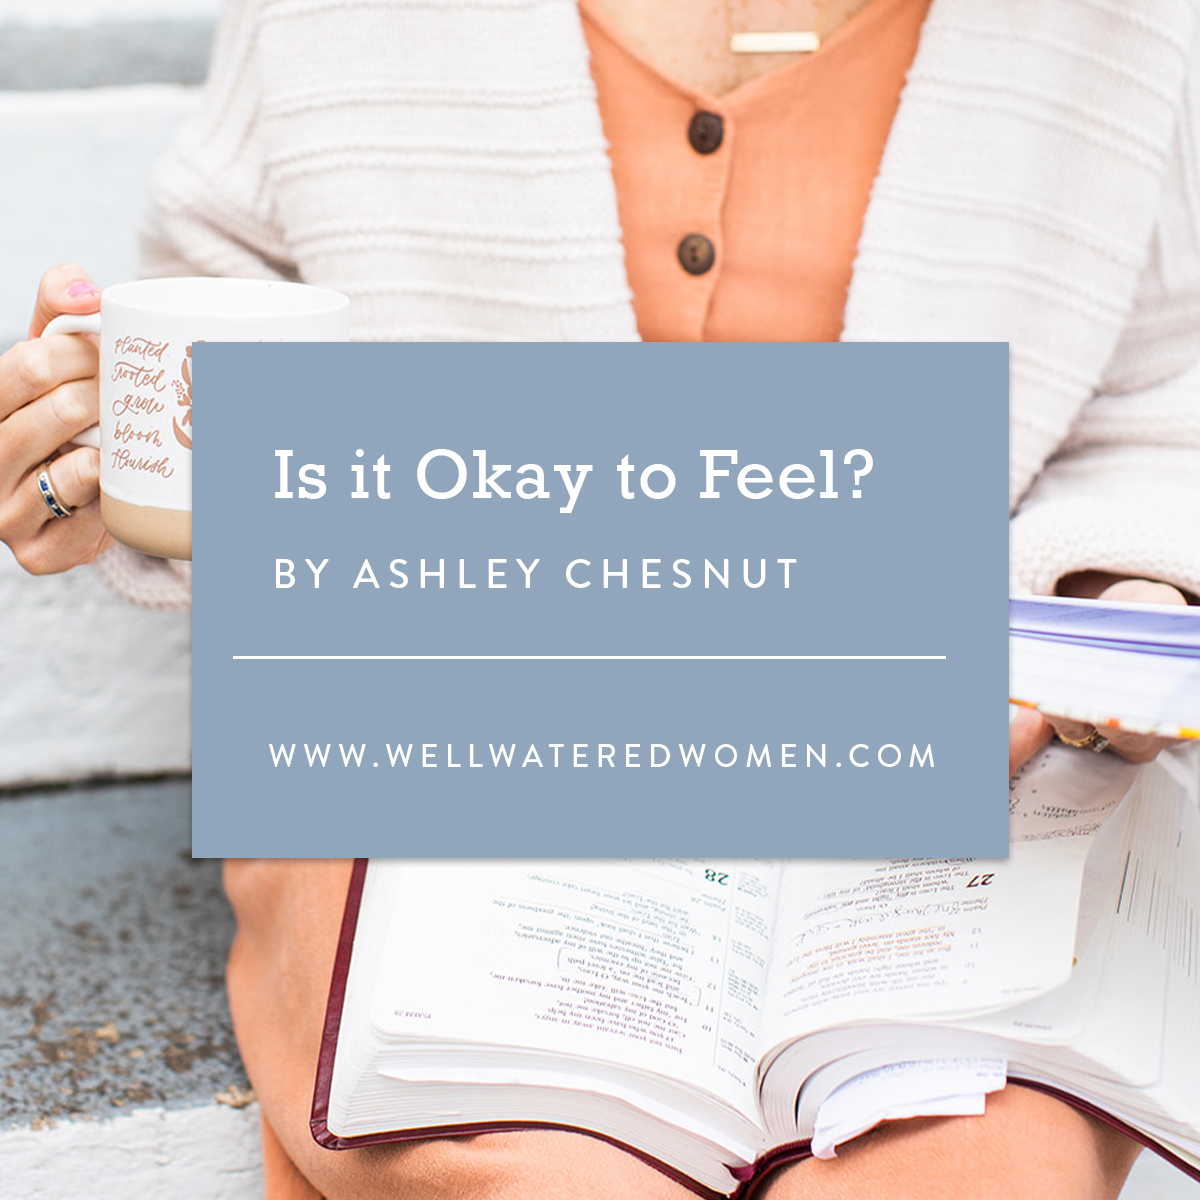 Is It Okay to Feel? - an Article from Well-Watered Women